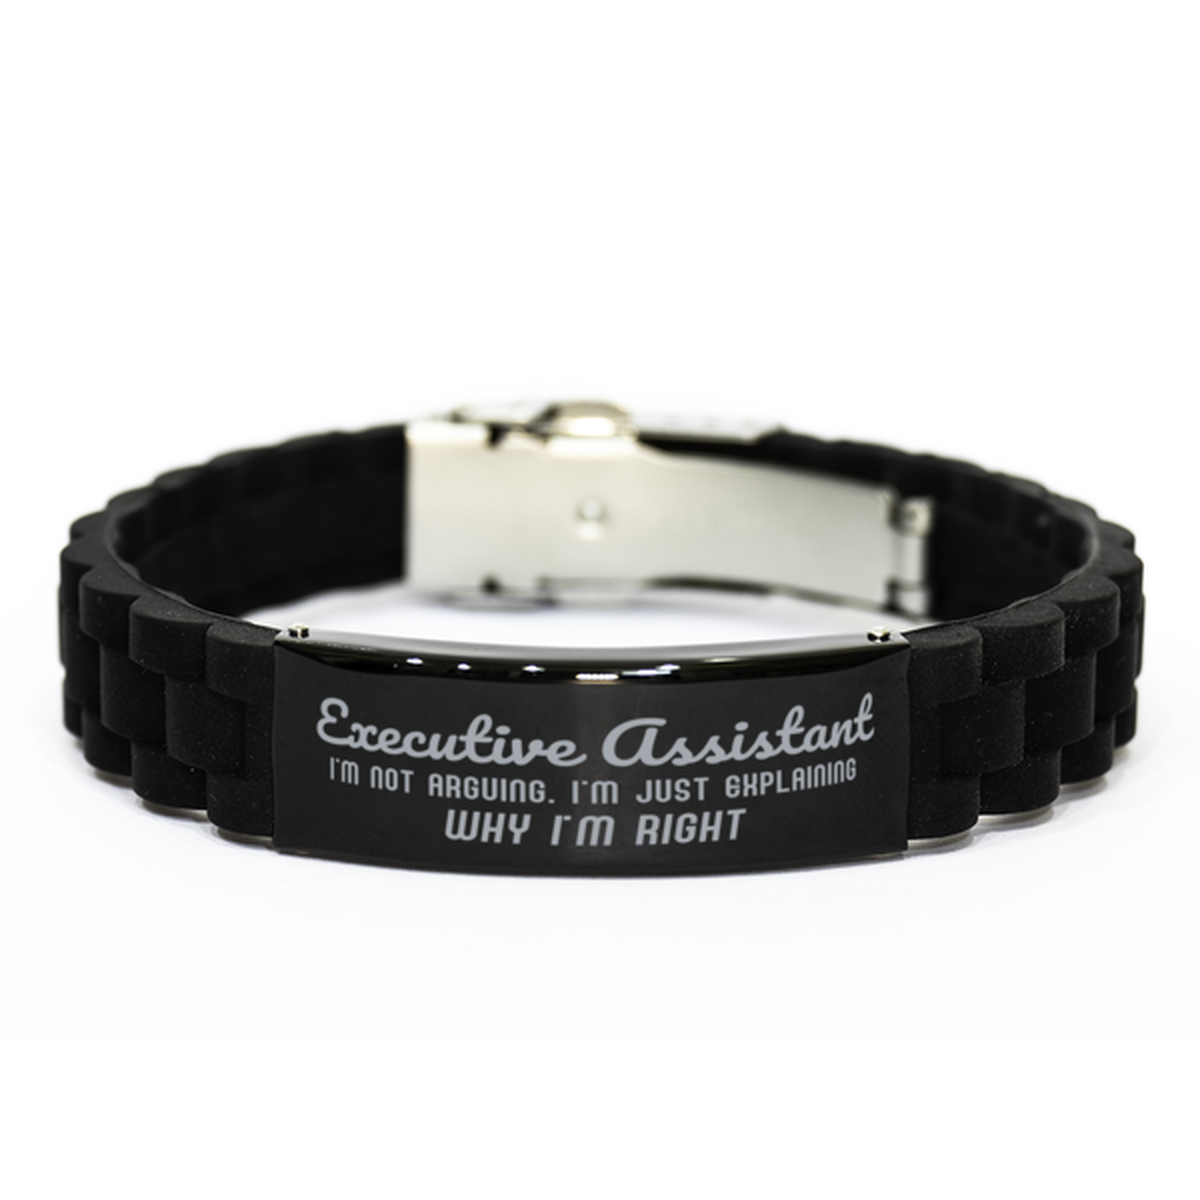 Executive Assistant I'm not Arguing. I'm Just Explaining Why I'm RIGHT Black Glidelock Clasp Bracelet, Funny Saying Quote Executive Assistant Gifts For Executive Assistant Graduation Birthday Christmas Gifts for Men Women Coworker